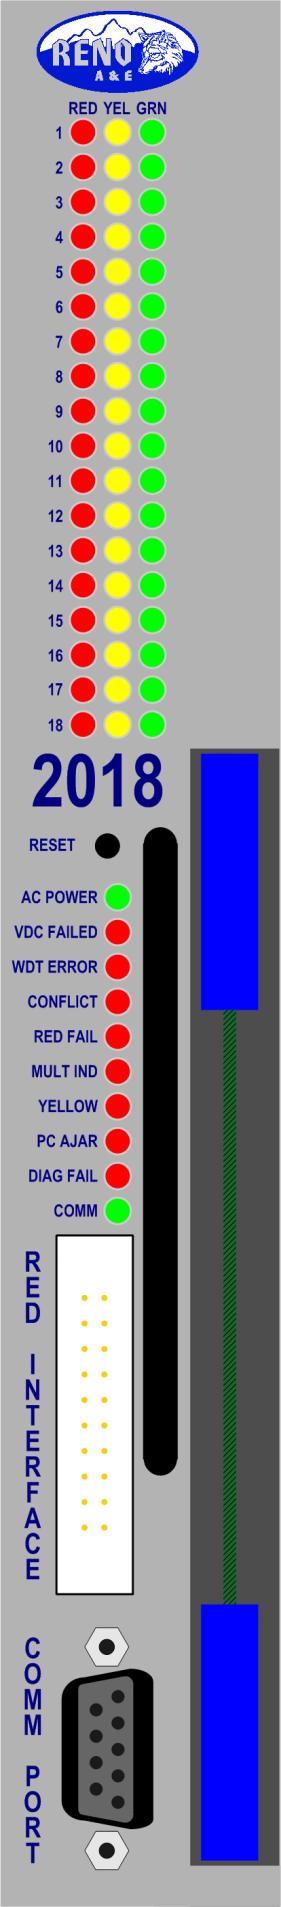 4.0 U S E R I N T E R F A C E Reset Button Press to attempt to clear Faults Turns on all LEDs for 300 msec Hold for 1.